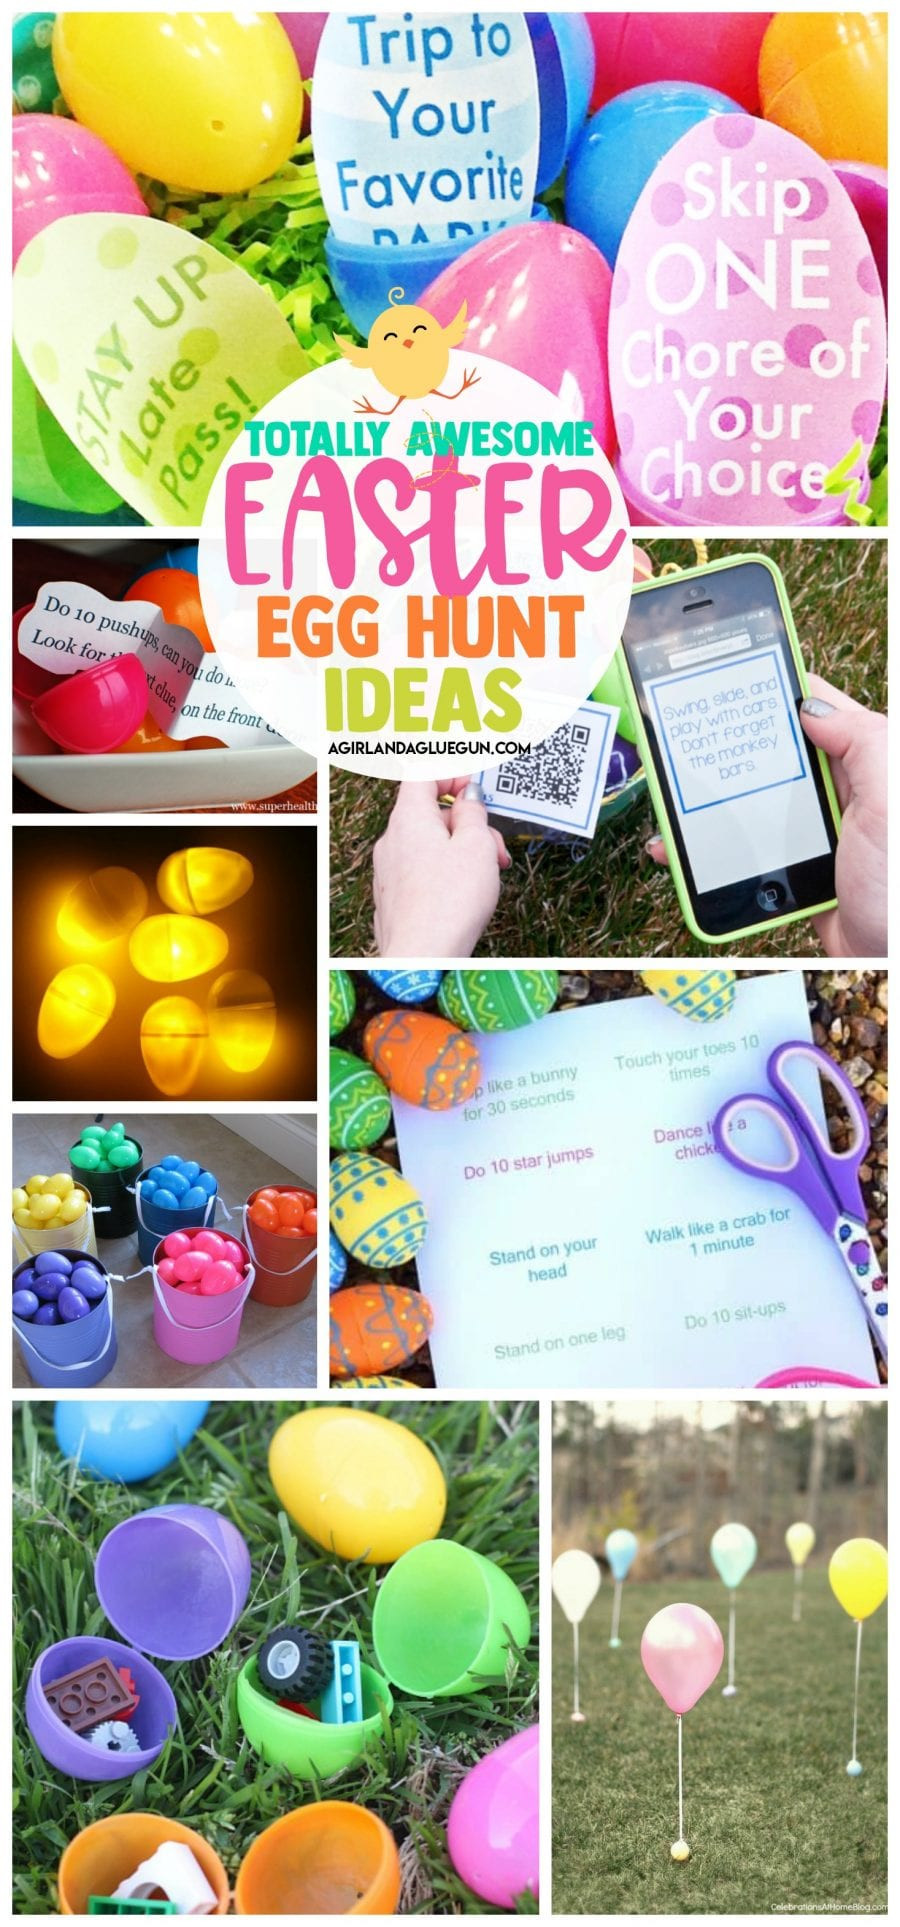 Fun Easter Egg Hunt Ideas
 Easter Egg hunt ideas that your kids will love to play